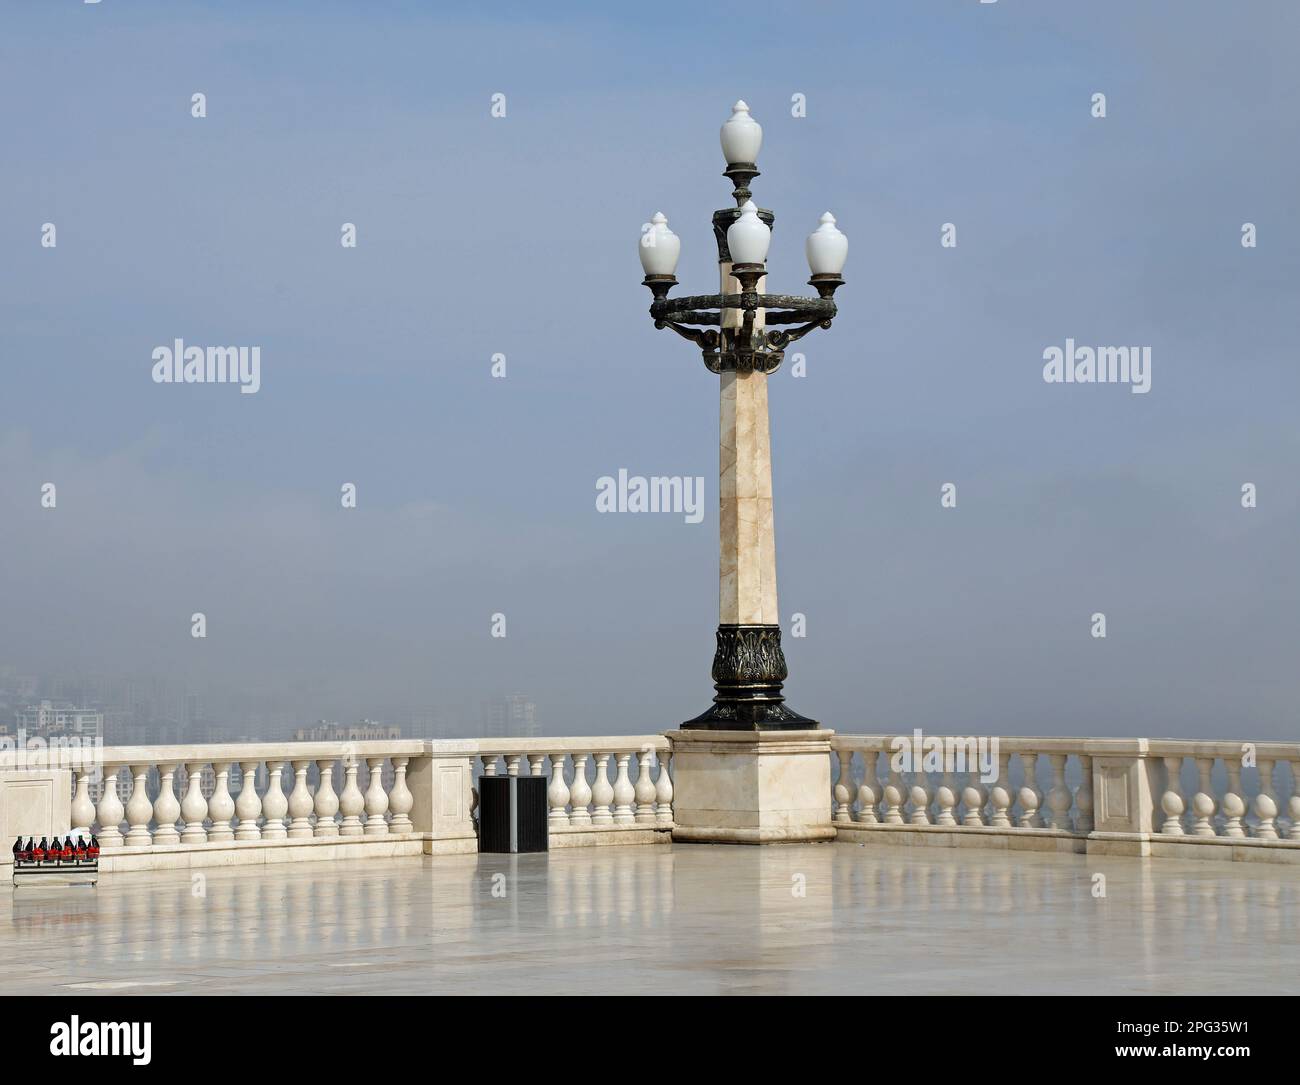 Viewing terrace at Upland Park in Baku Stock Photo